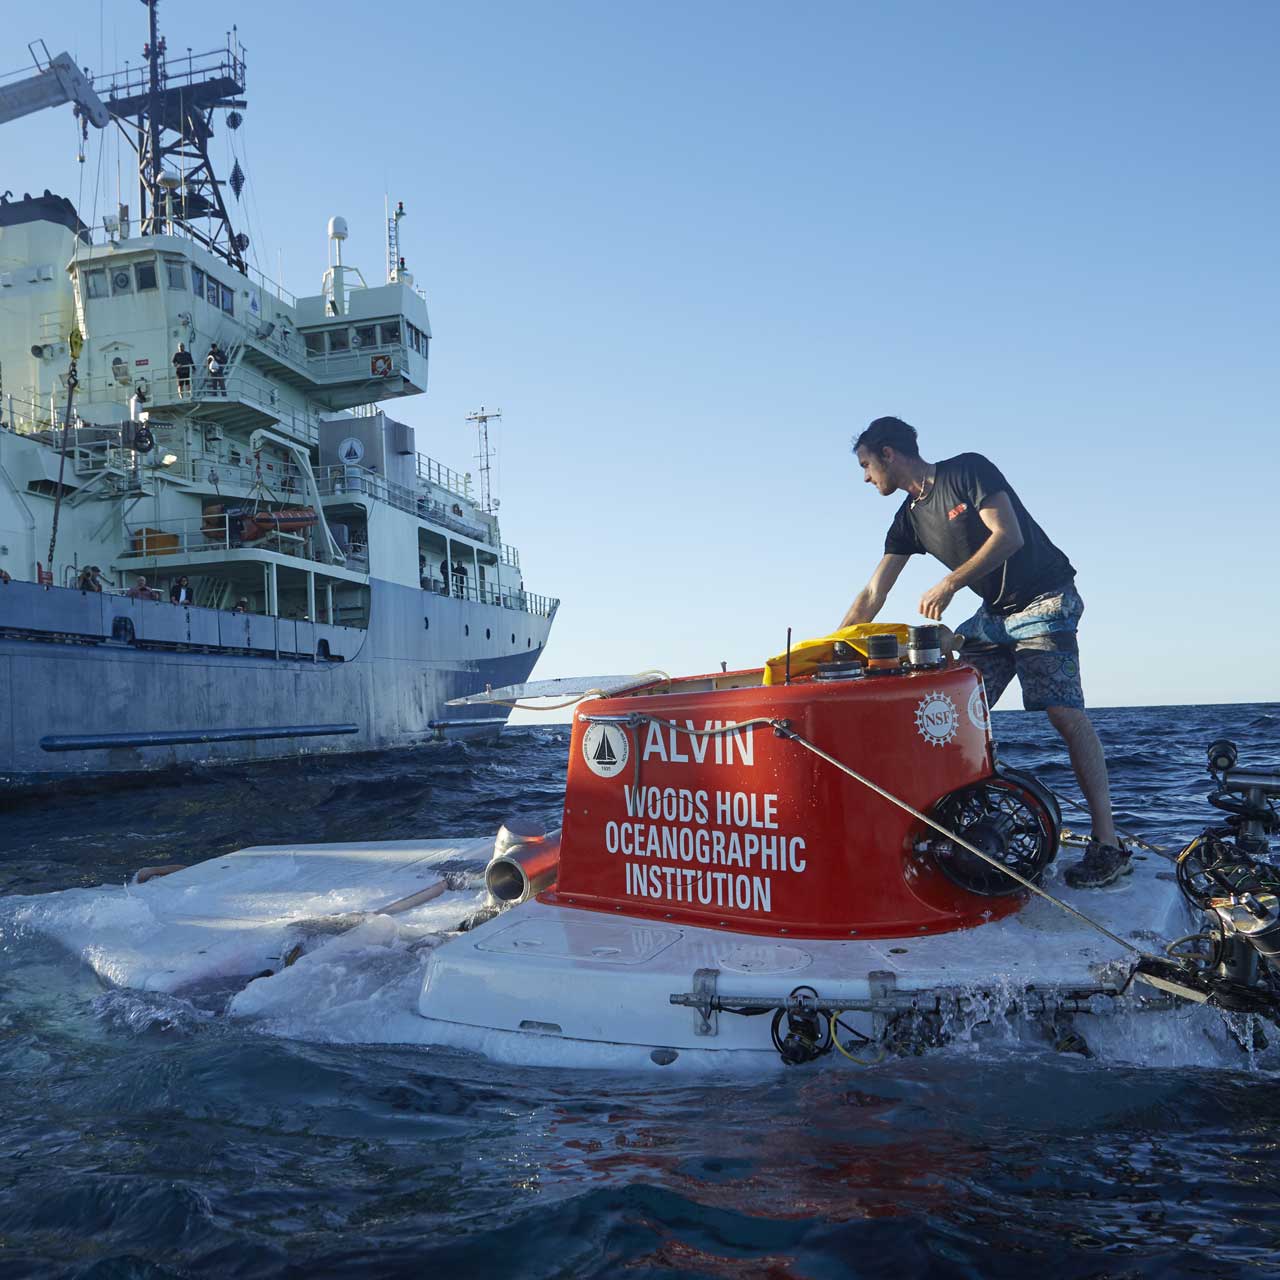 An Alvin team member prepares the sub for recovery after its 5000th dive in November 2018. (Photo by Drew Beweley, ©Woods Hole Oceanographic Institution)